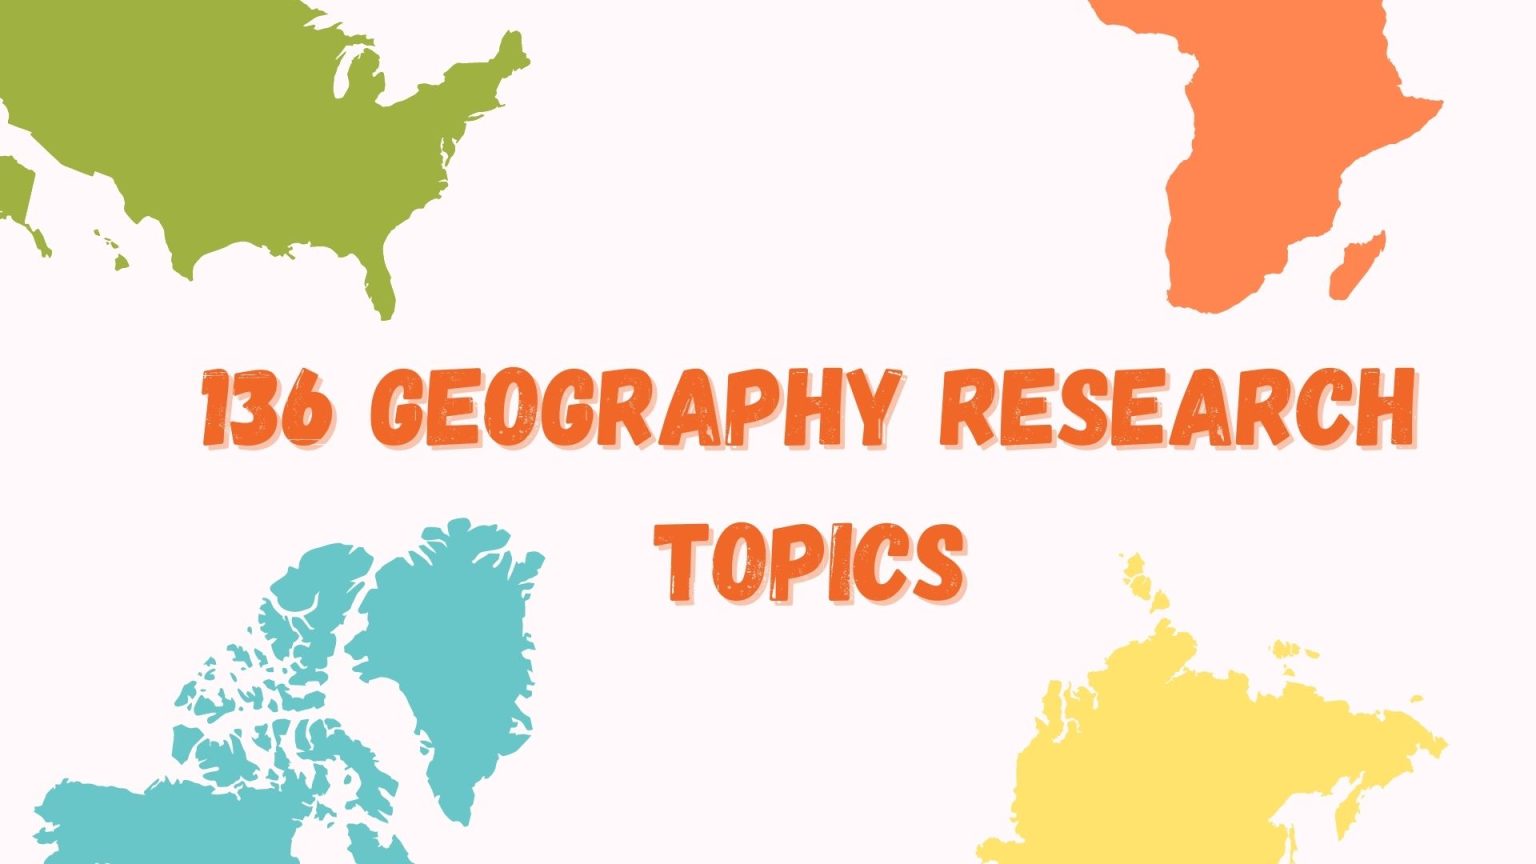 topics for research in geography